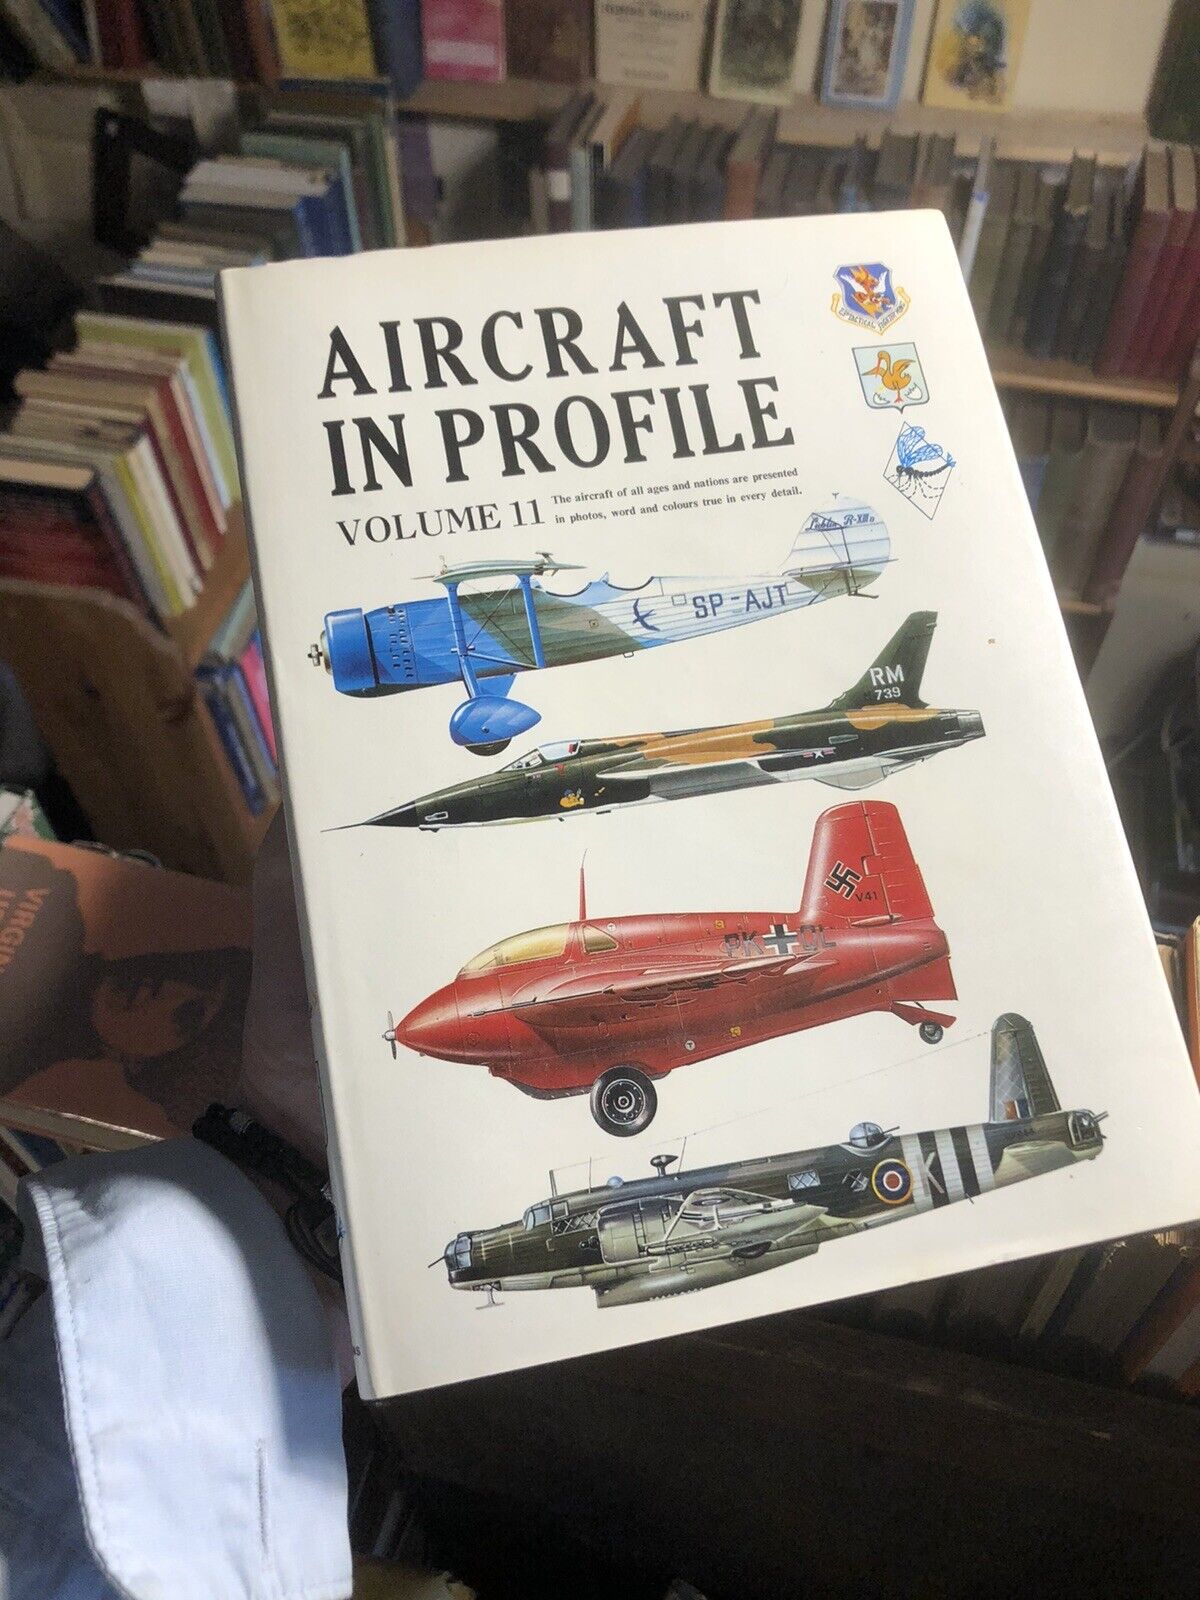 Aircraft in Profile (Volume 11) : Military Air Force : Charles W Cain 1971